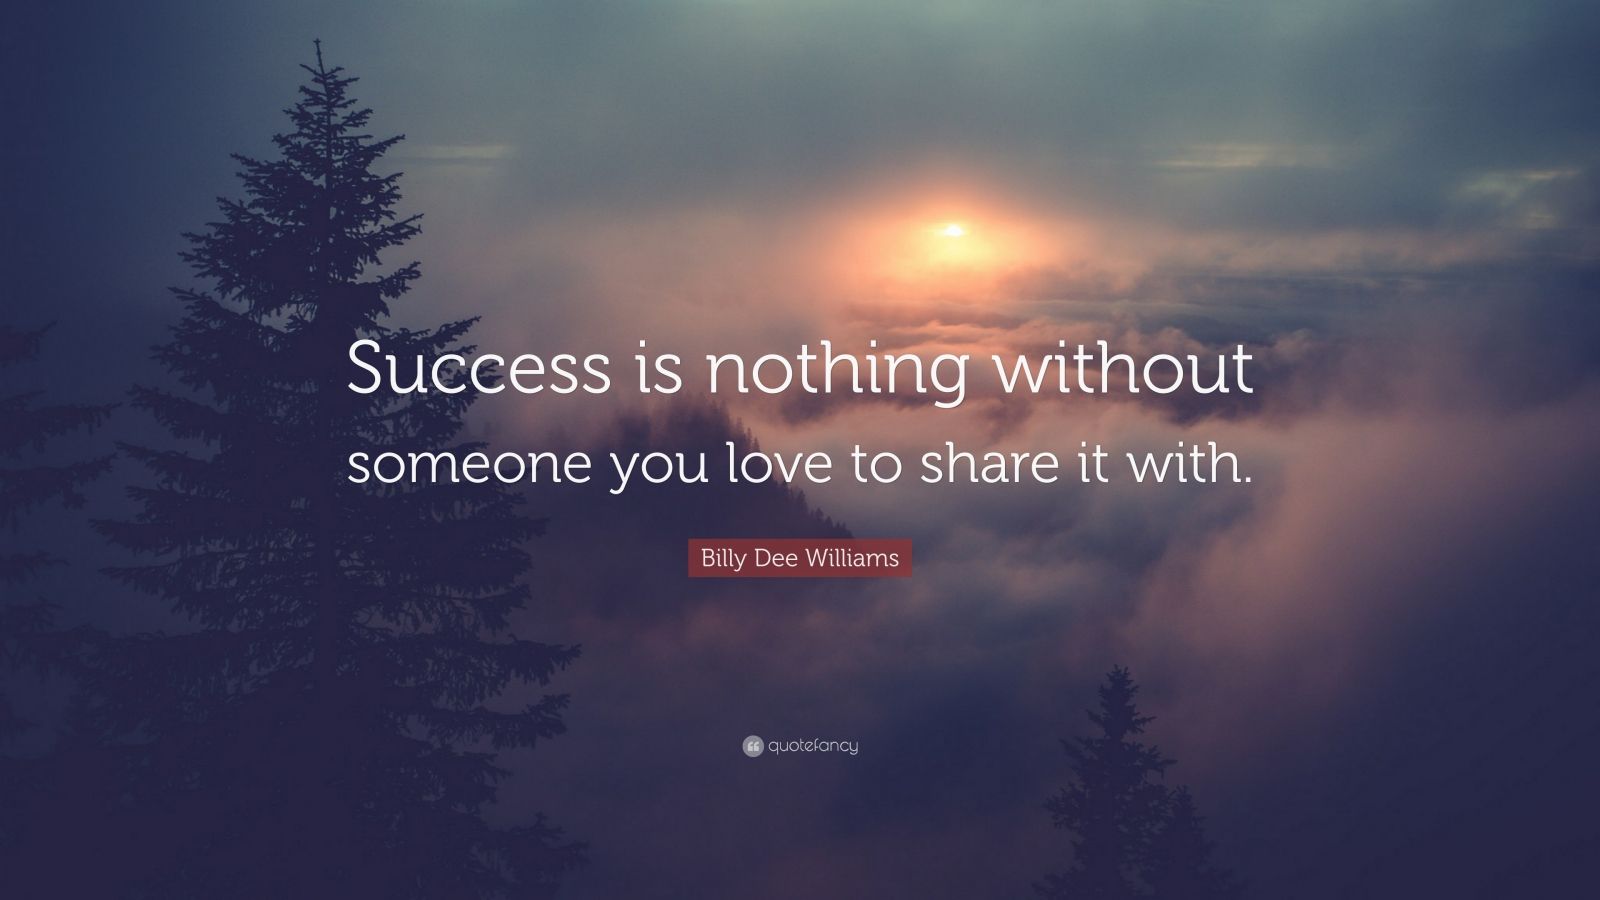 Billy Dee Williams Quote: “Success is nothing without someone you love